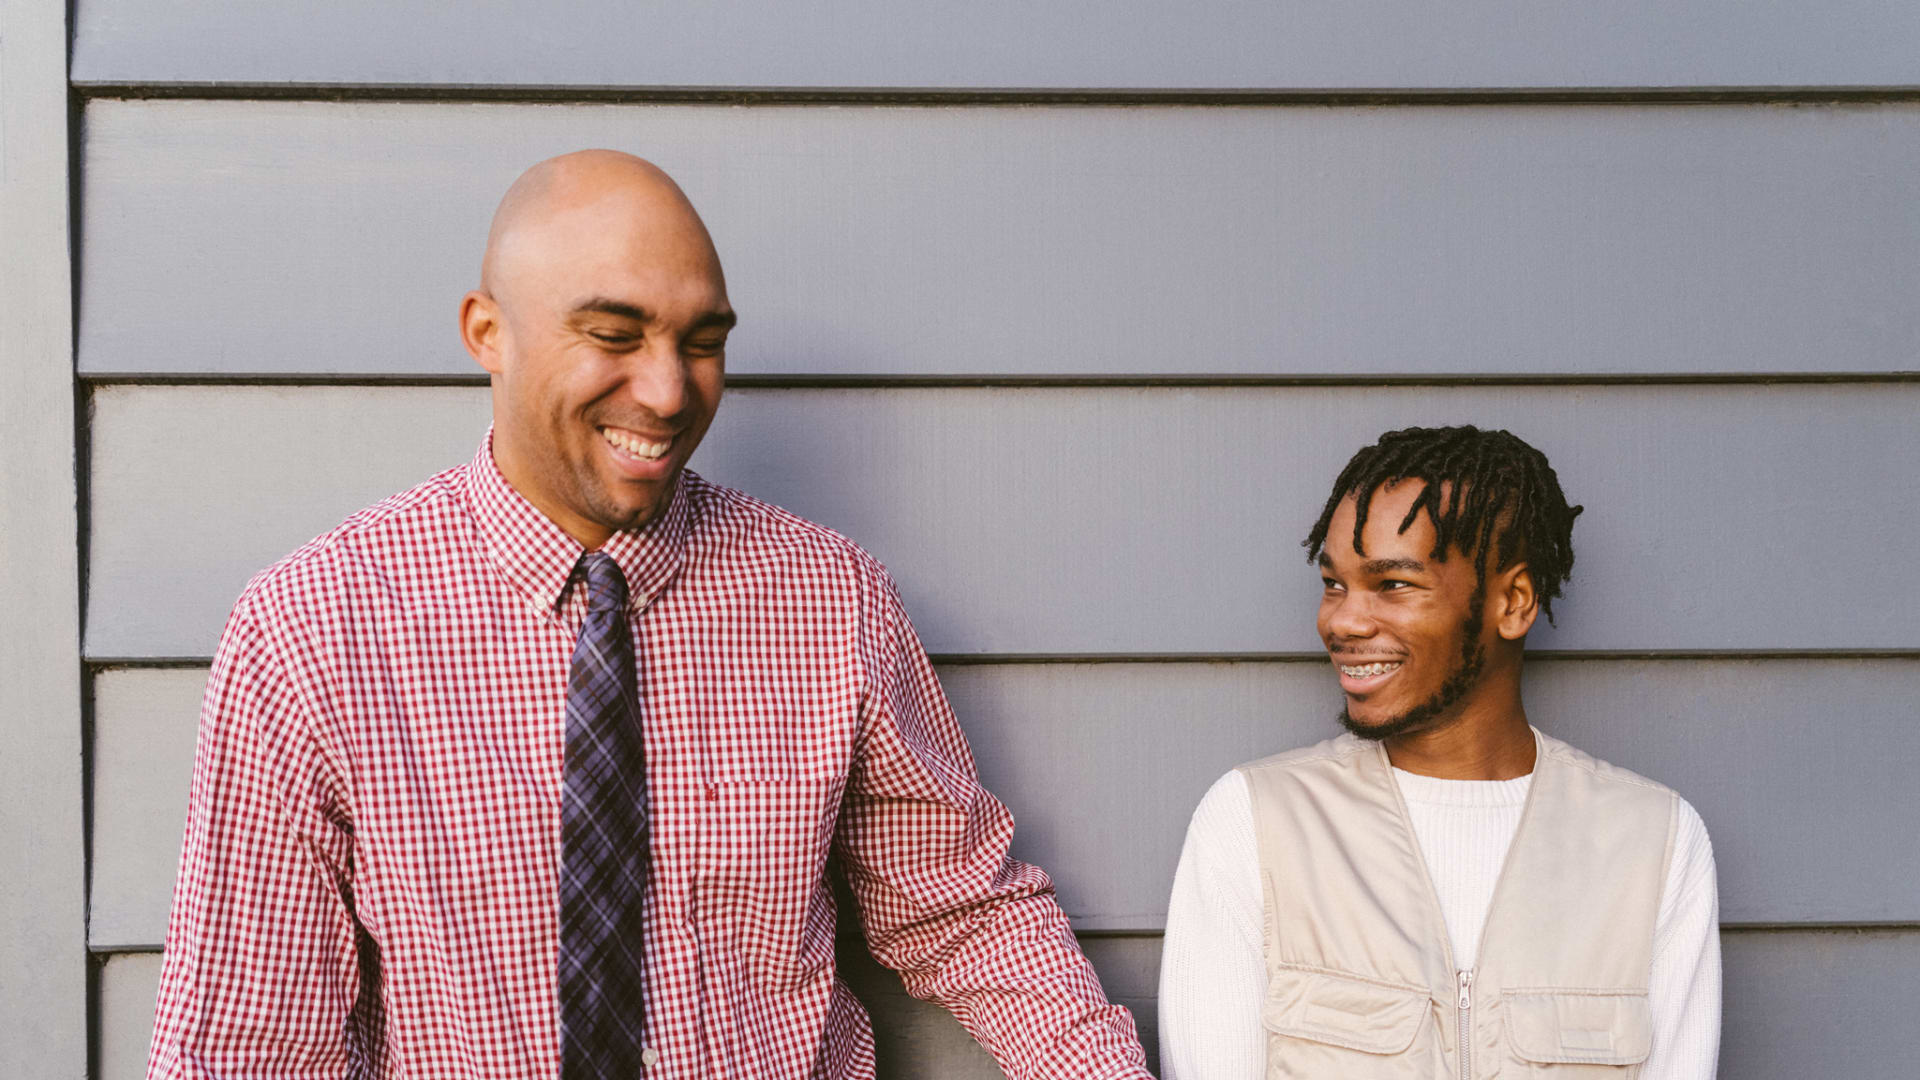 “We invest in our young people because they have an immense capacity to do better, not just for themselves but also for their communities,” says the Hidden Genius Project’s Brandon Nicholson, pictured left, with student Perry Irving.